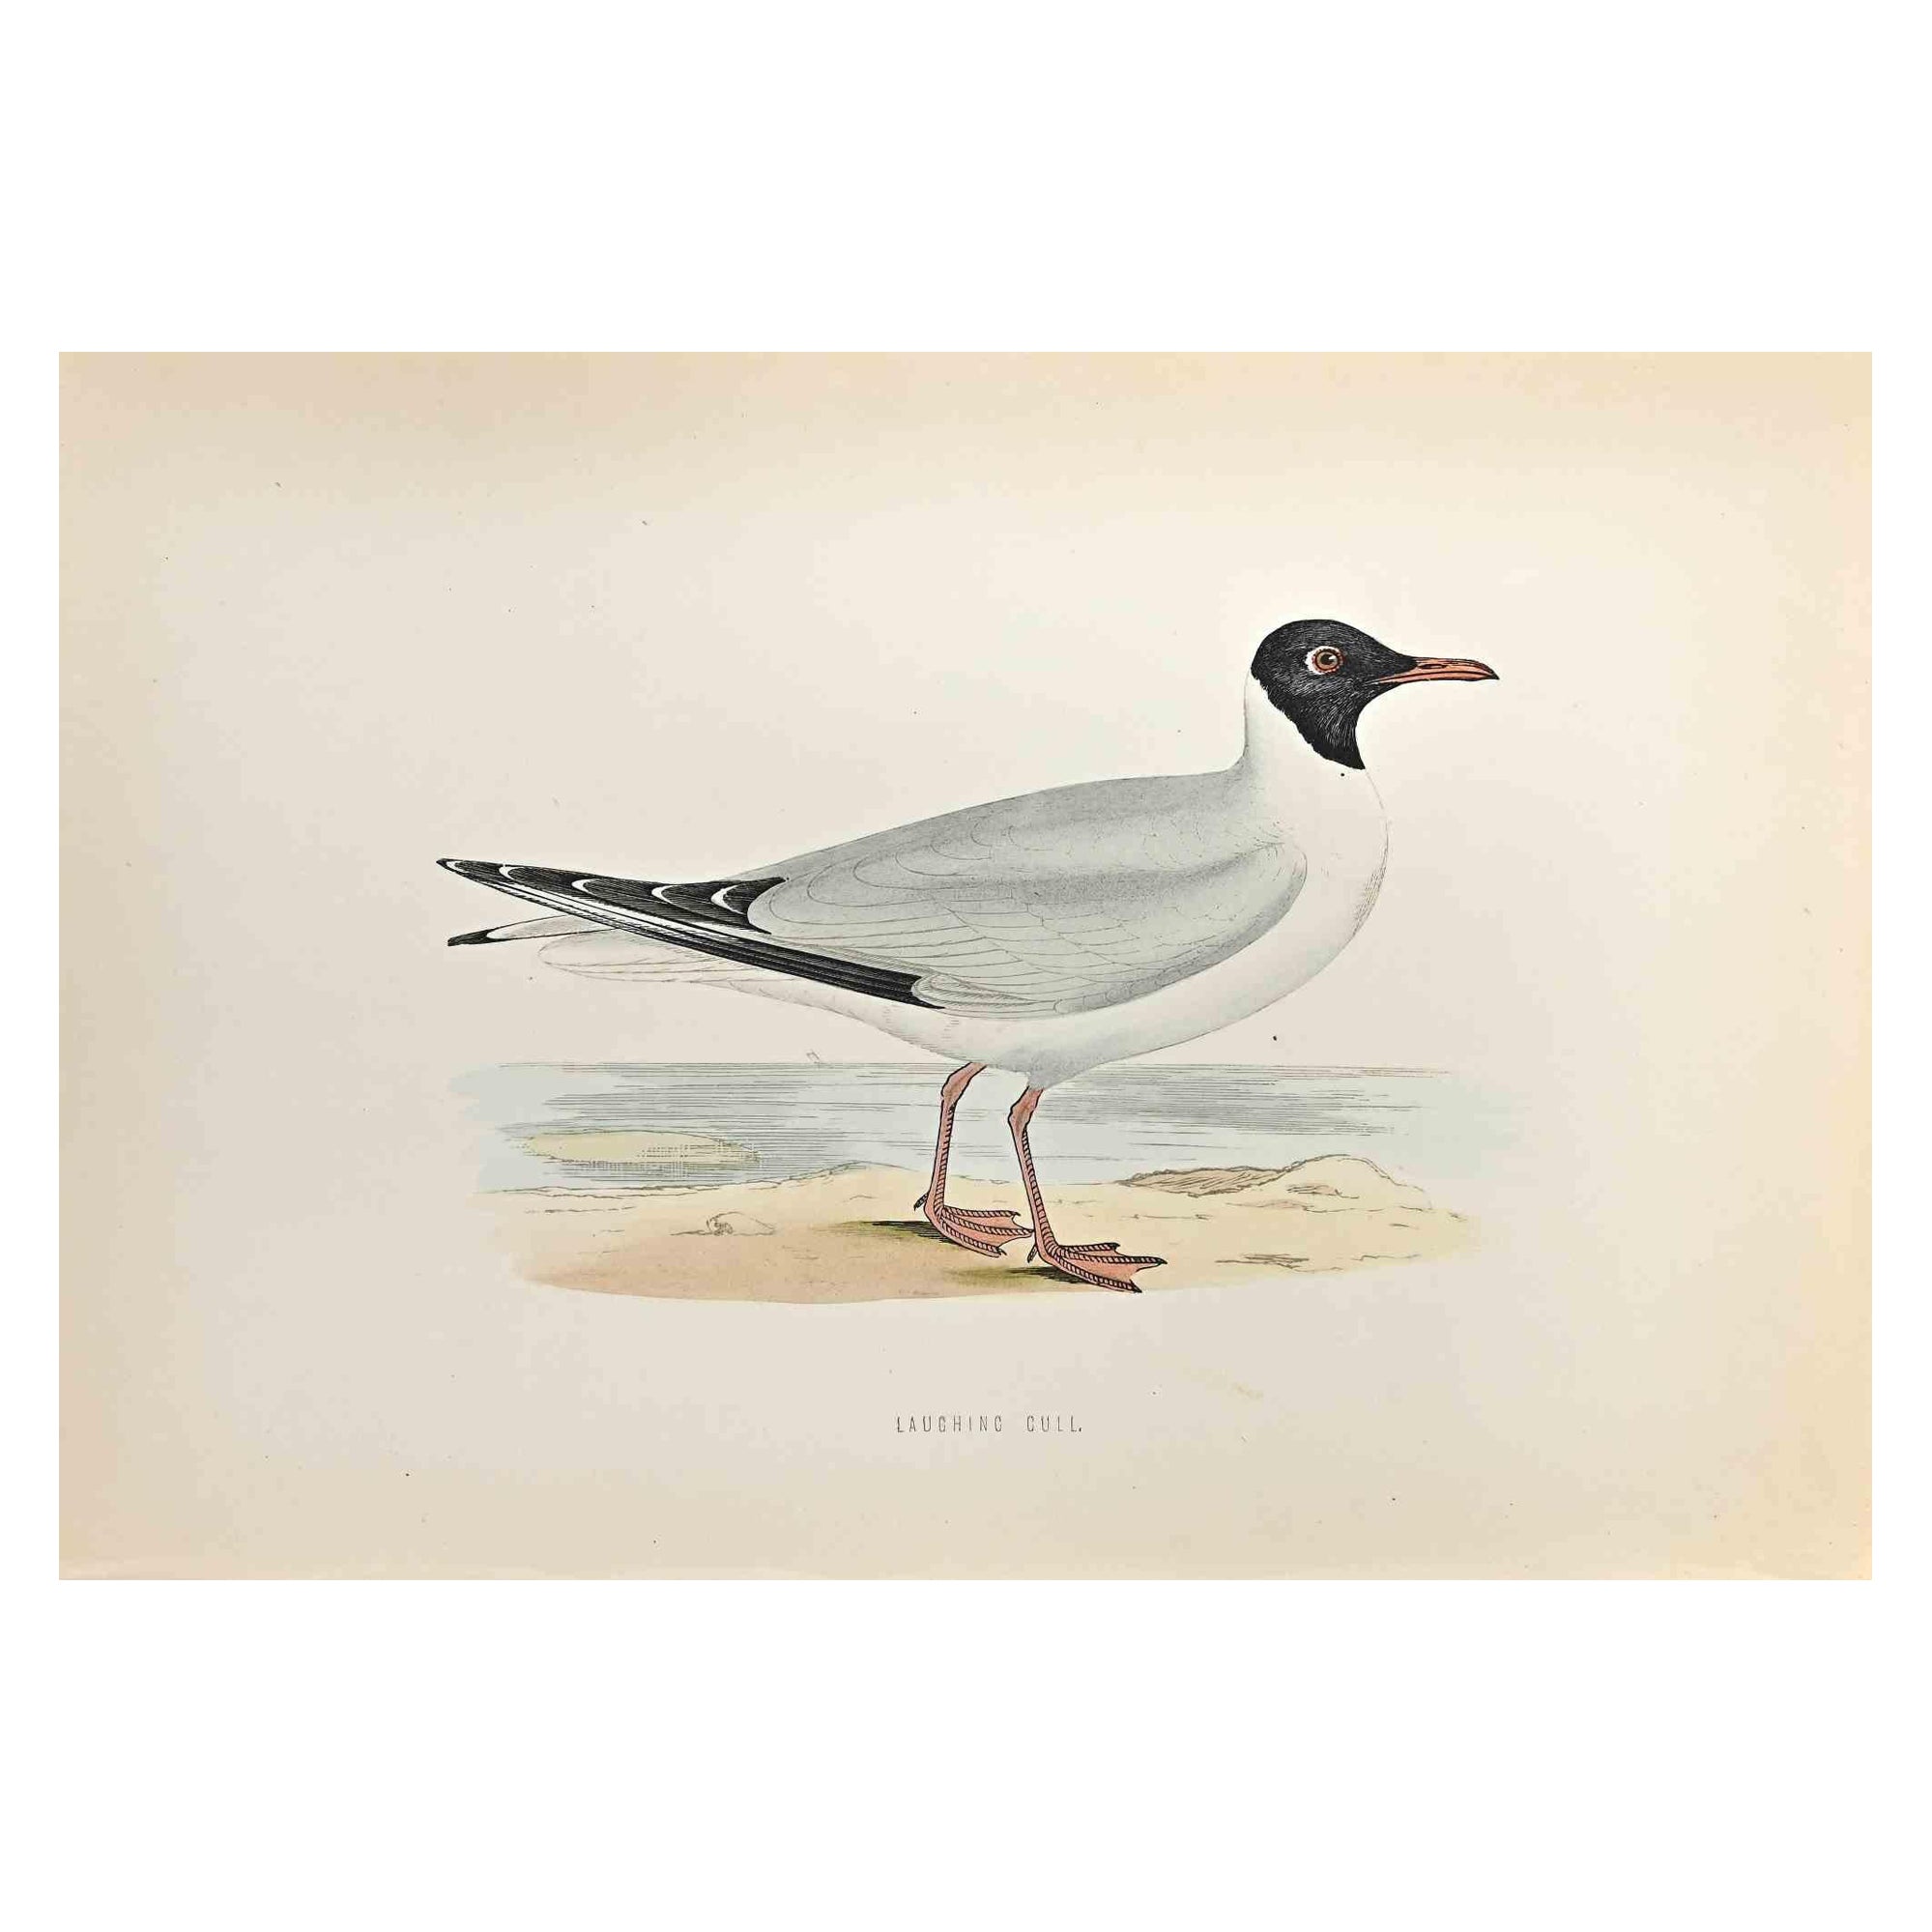 Laughing Gull is  a modern artwork realized in 1870 by the British artist Alexander Francis Lydon (1836-1917) . 

Woodcut print, hand colored, published by London, Bell & Sons, 1870.  Name of the bird printed in plate. This work is part of a print